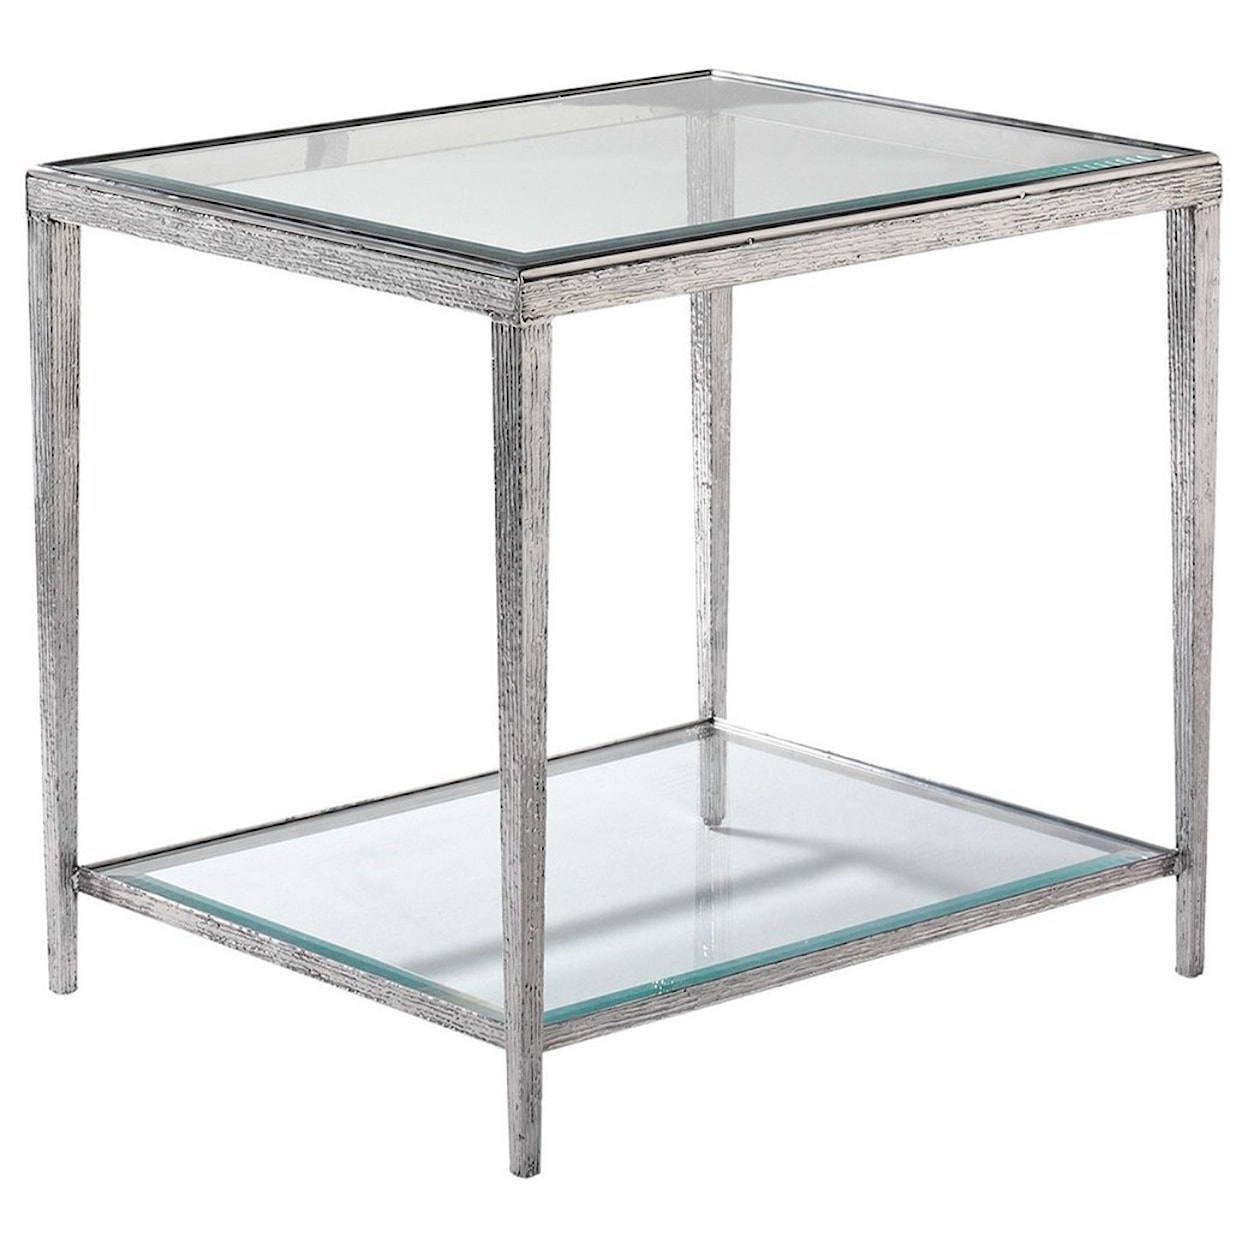 Hancock & Moore H & M Occasional Jinx Nickel Side Table - Square